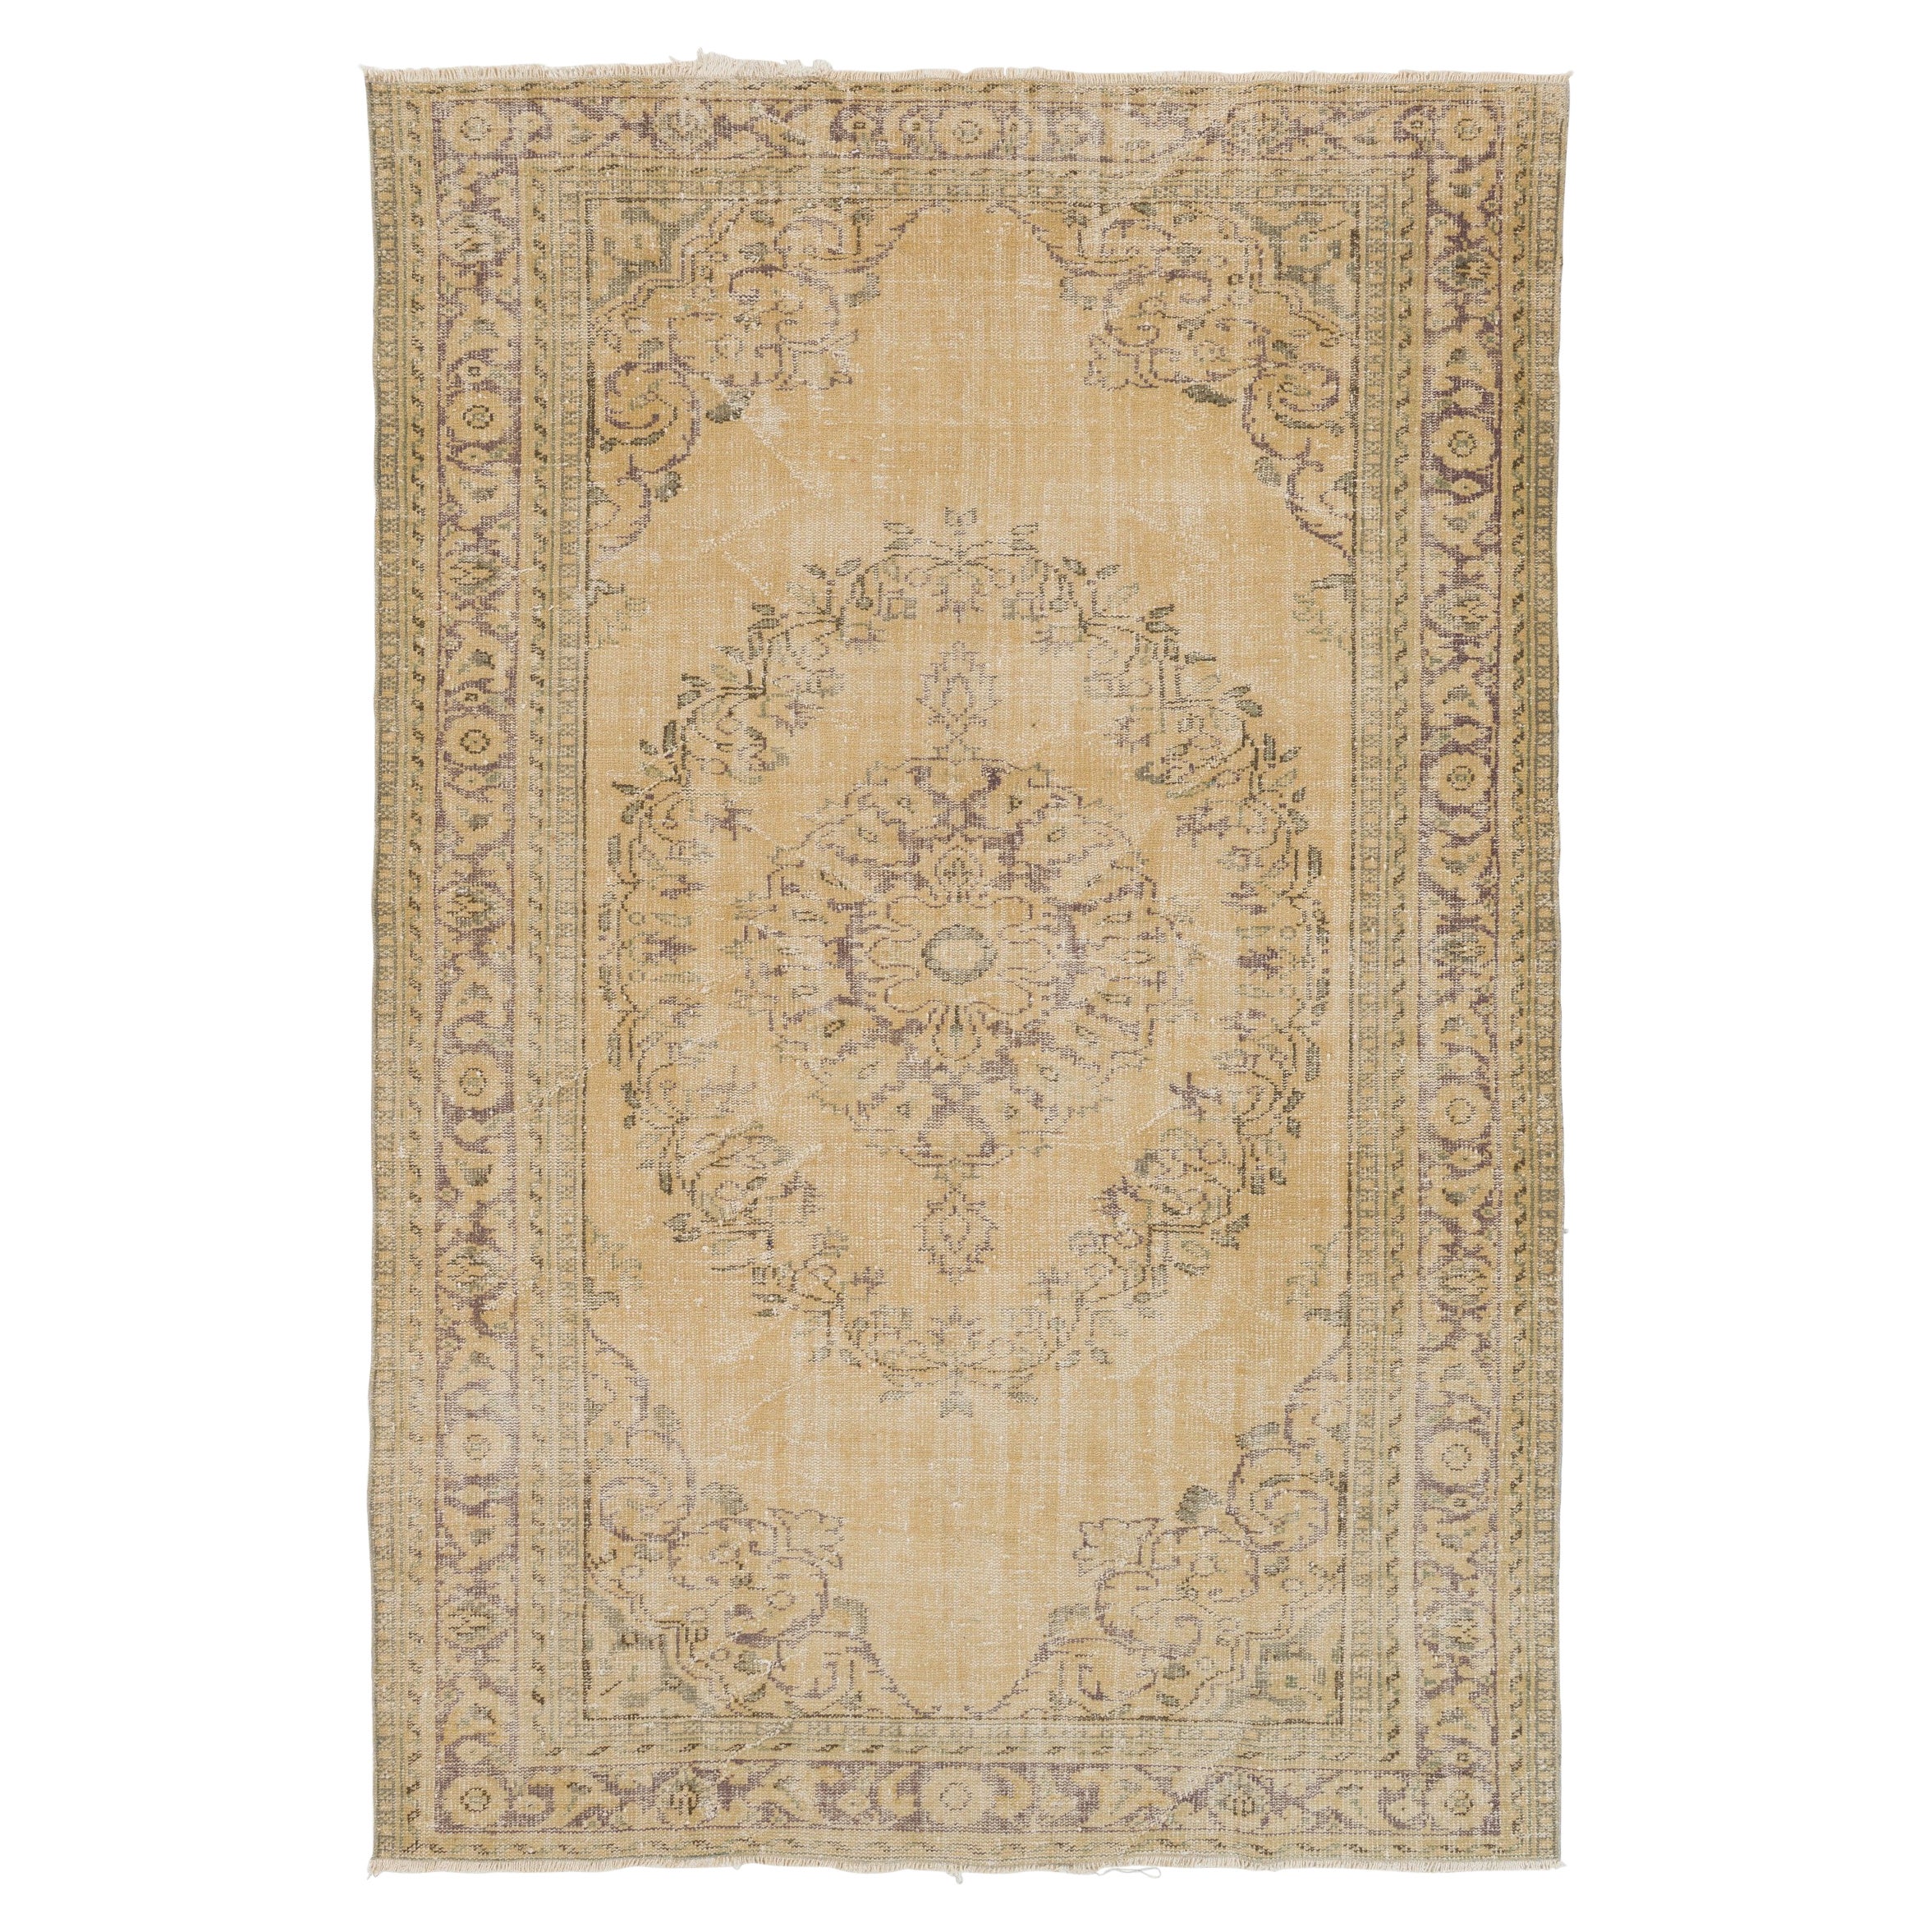 6.8x10 Ft One of a Kind Vintage Hand Knotted Oushak Area Rug in Soft Colors For Sale